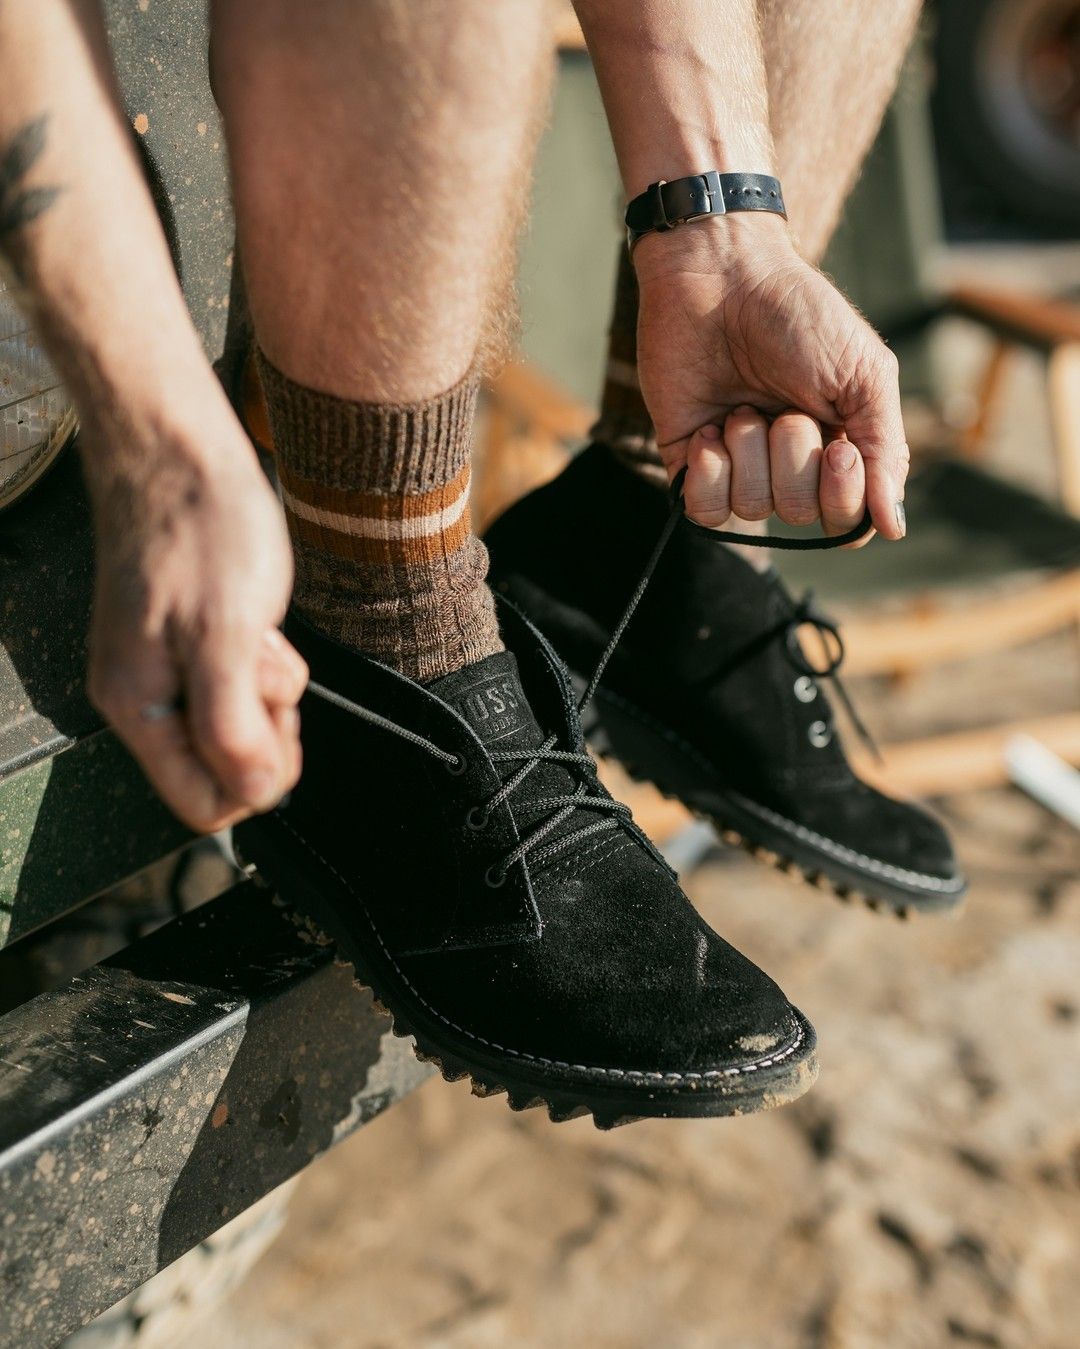 Rossi’s stitchdown desert boot tradition...

Shop all via link in bio. 

#RossiBoots